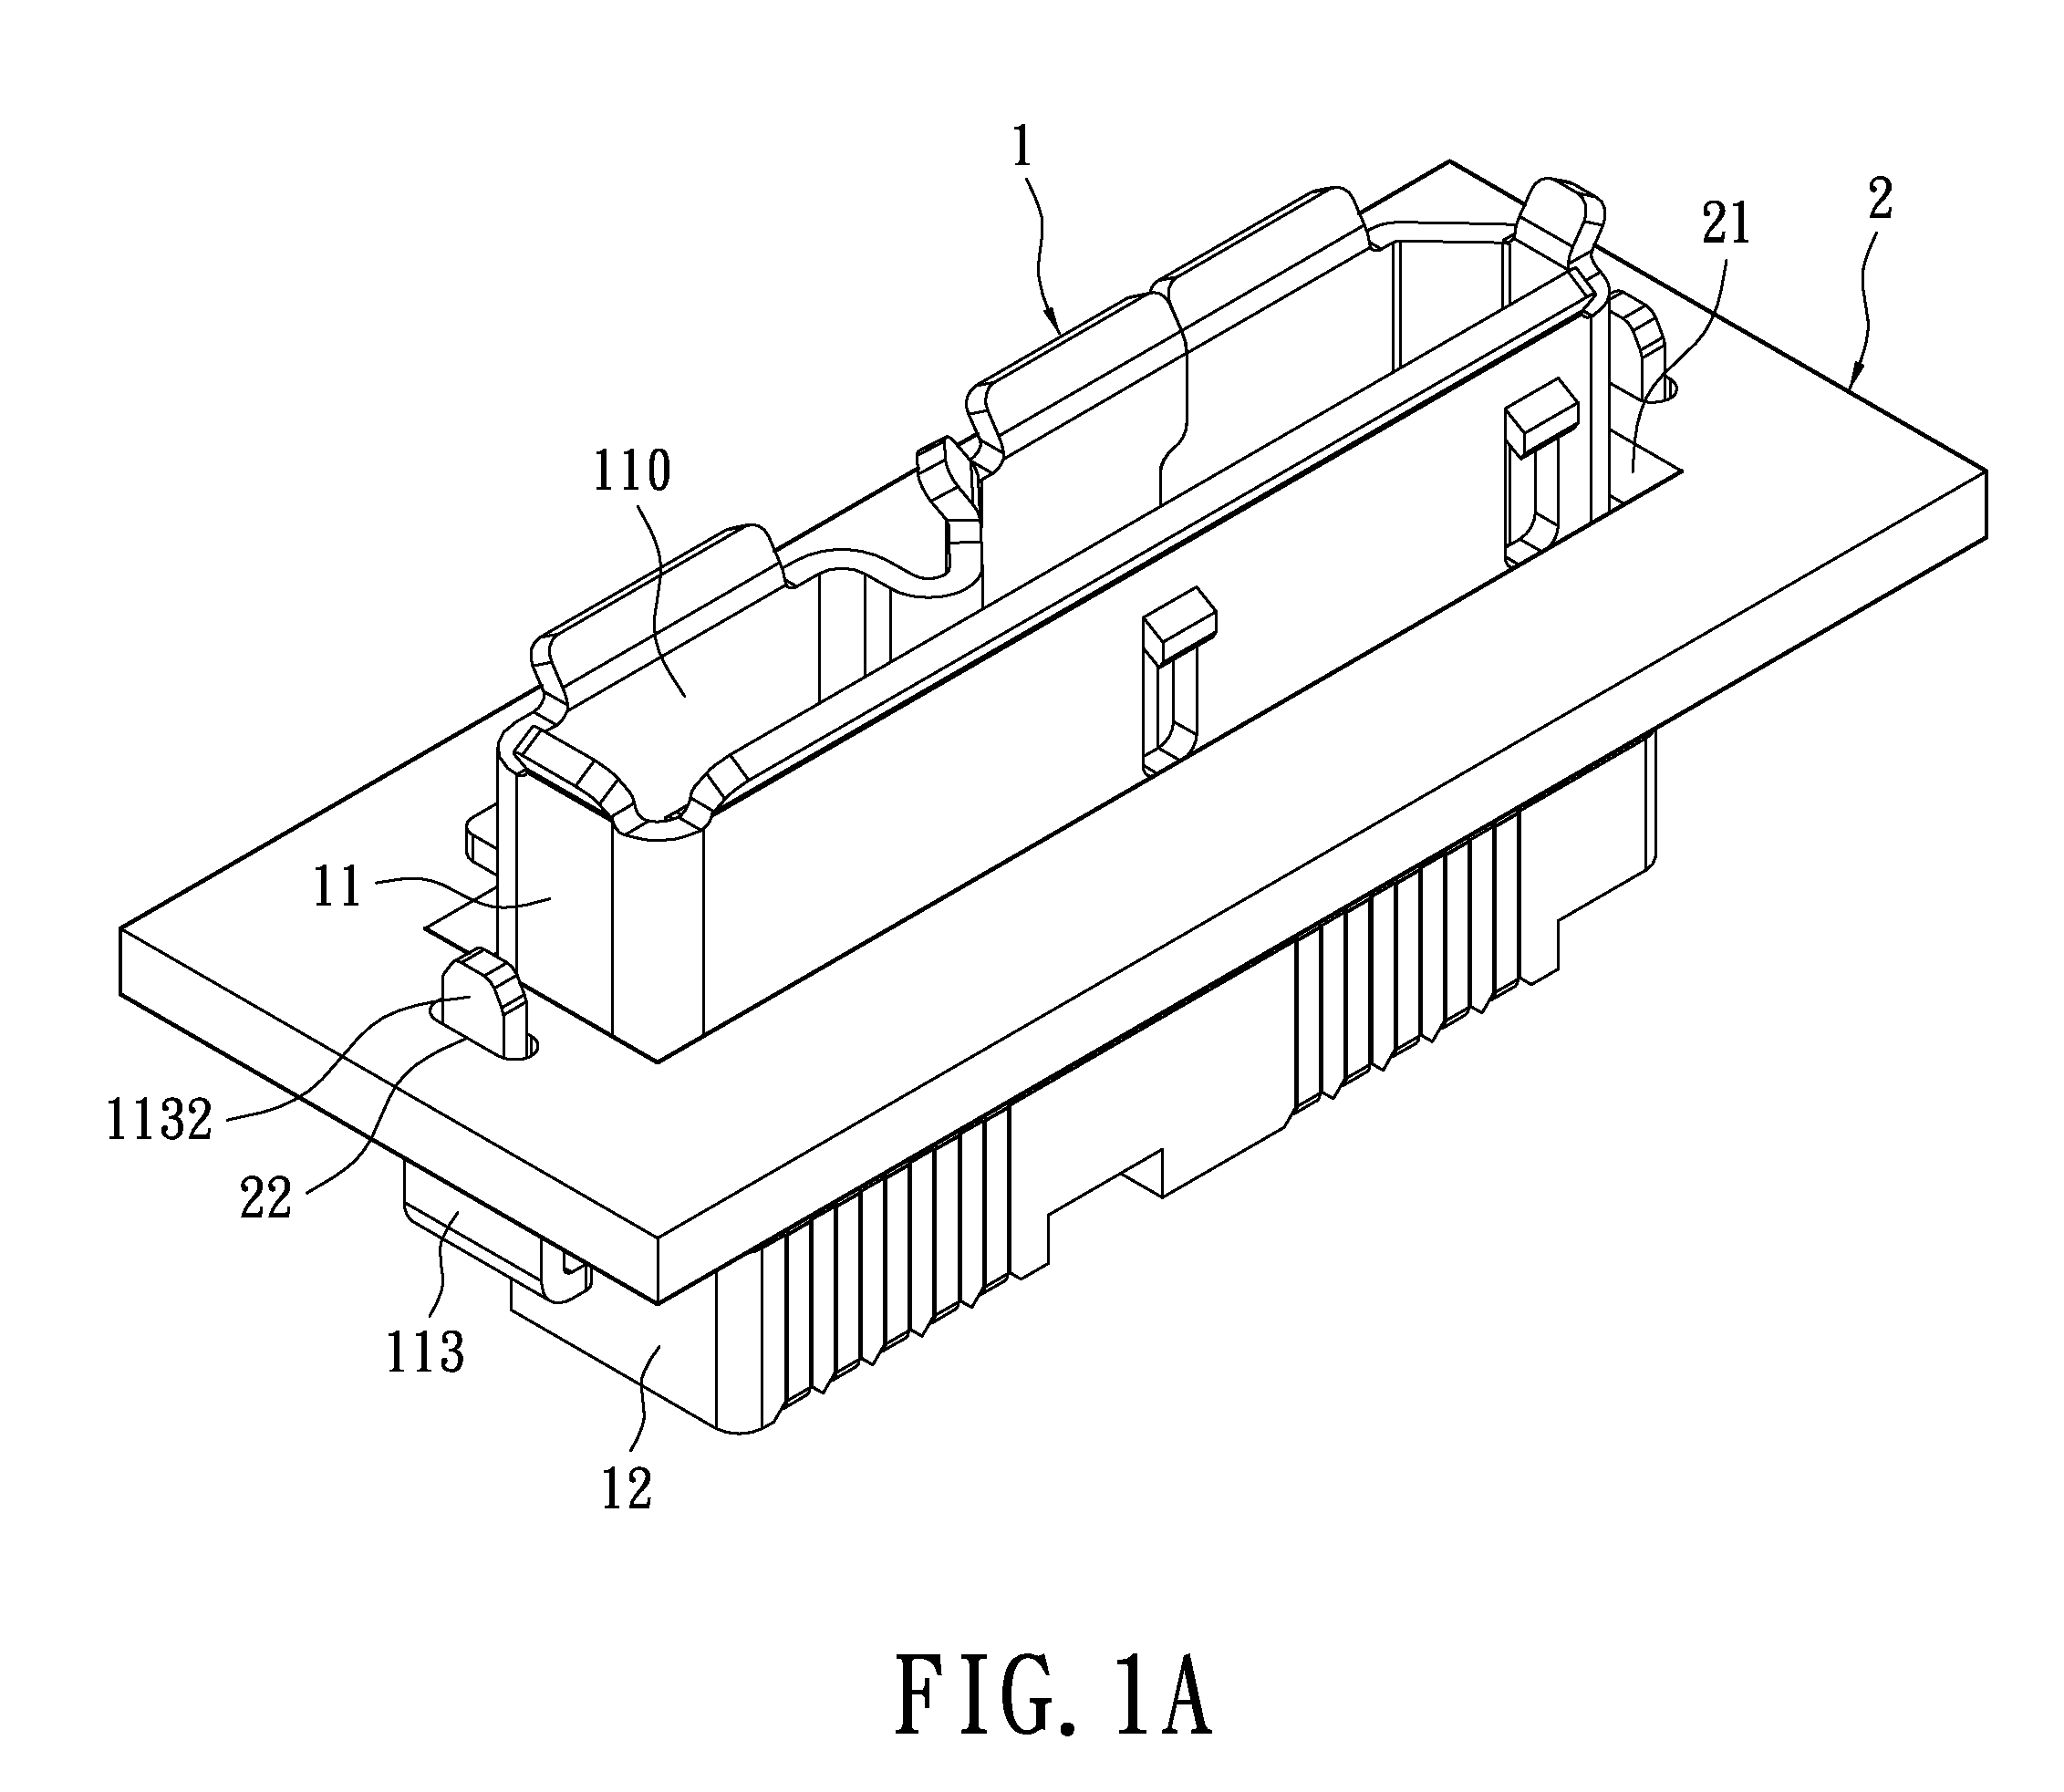 Connector mounted vertically through a hole in a printed circuit board